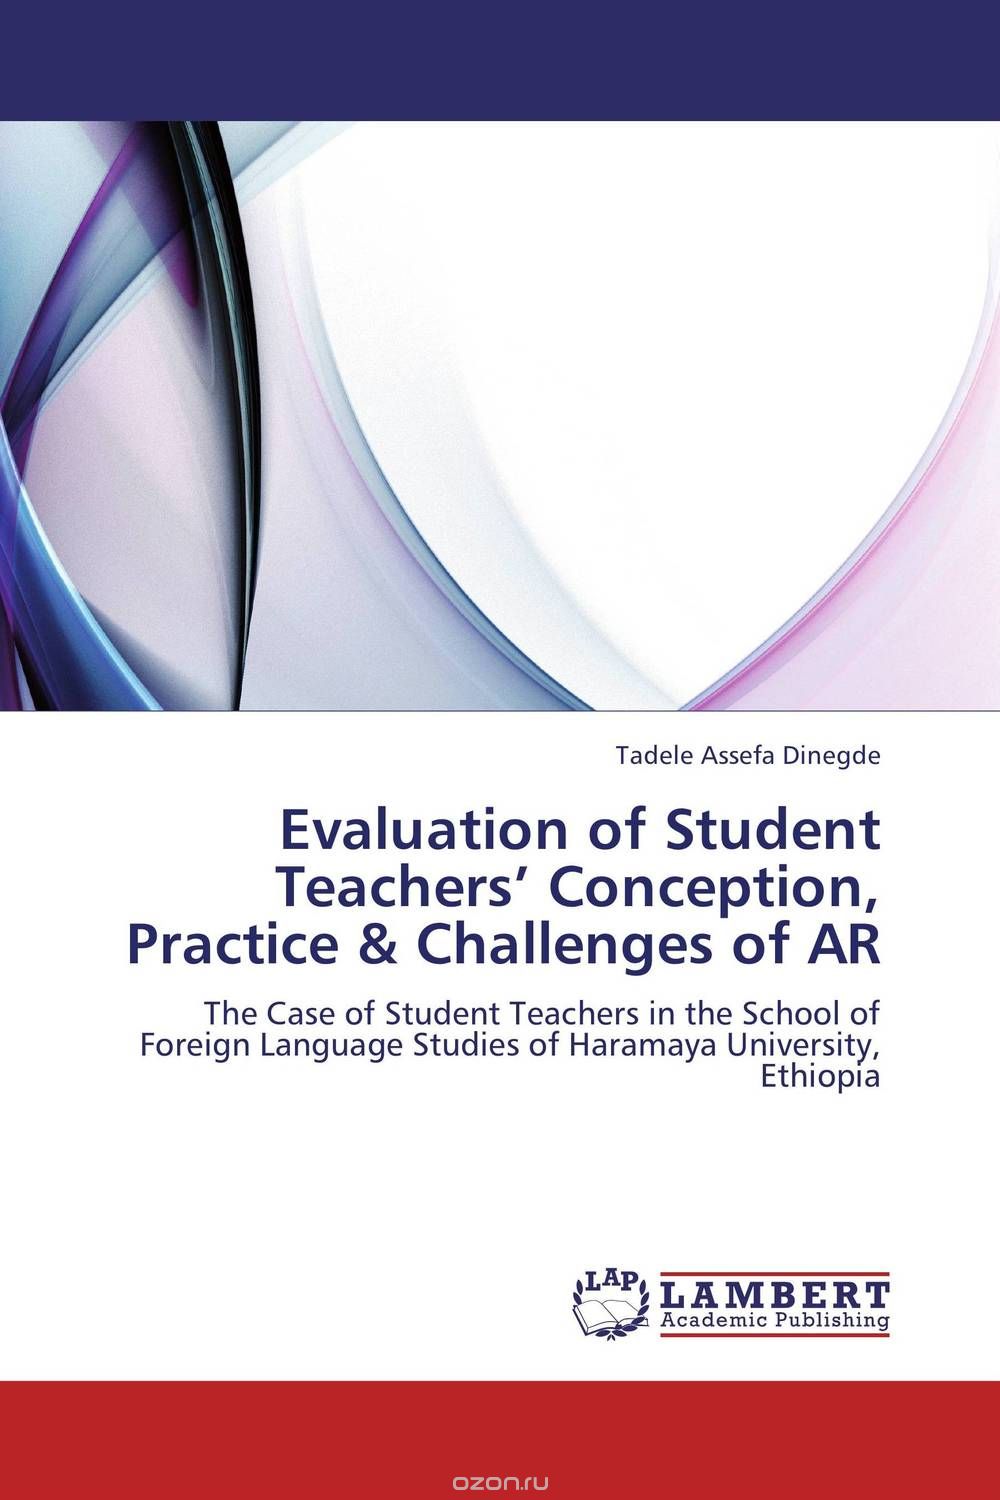 Evaluation of Student Teachers’ Conception, Practice & Challenges of AR